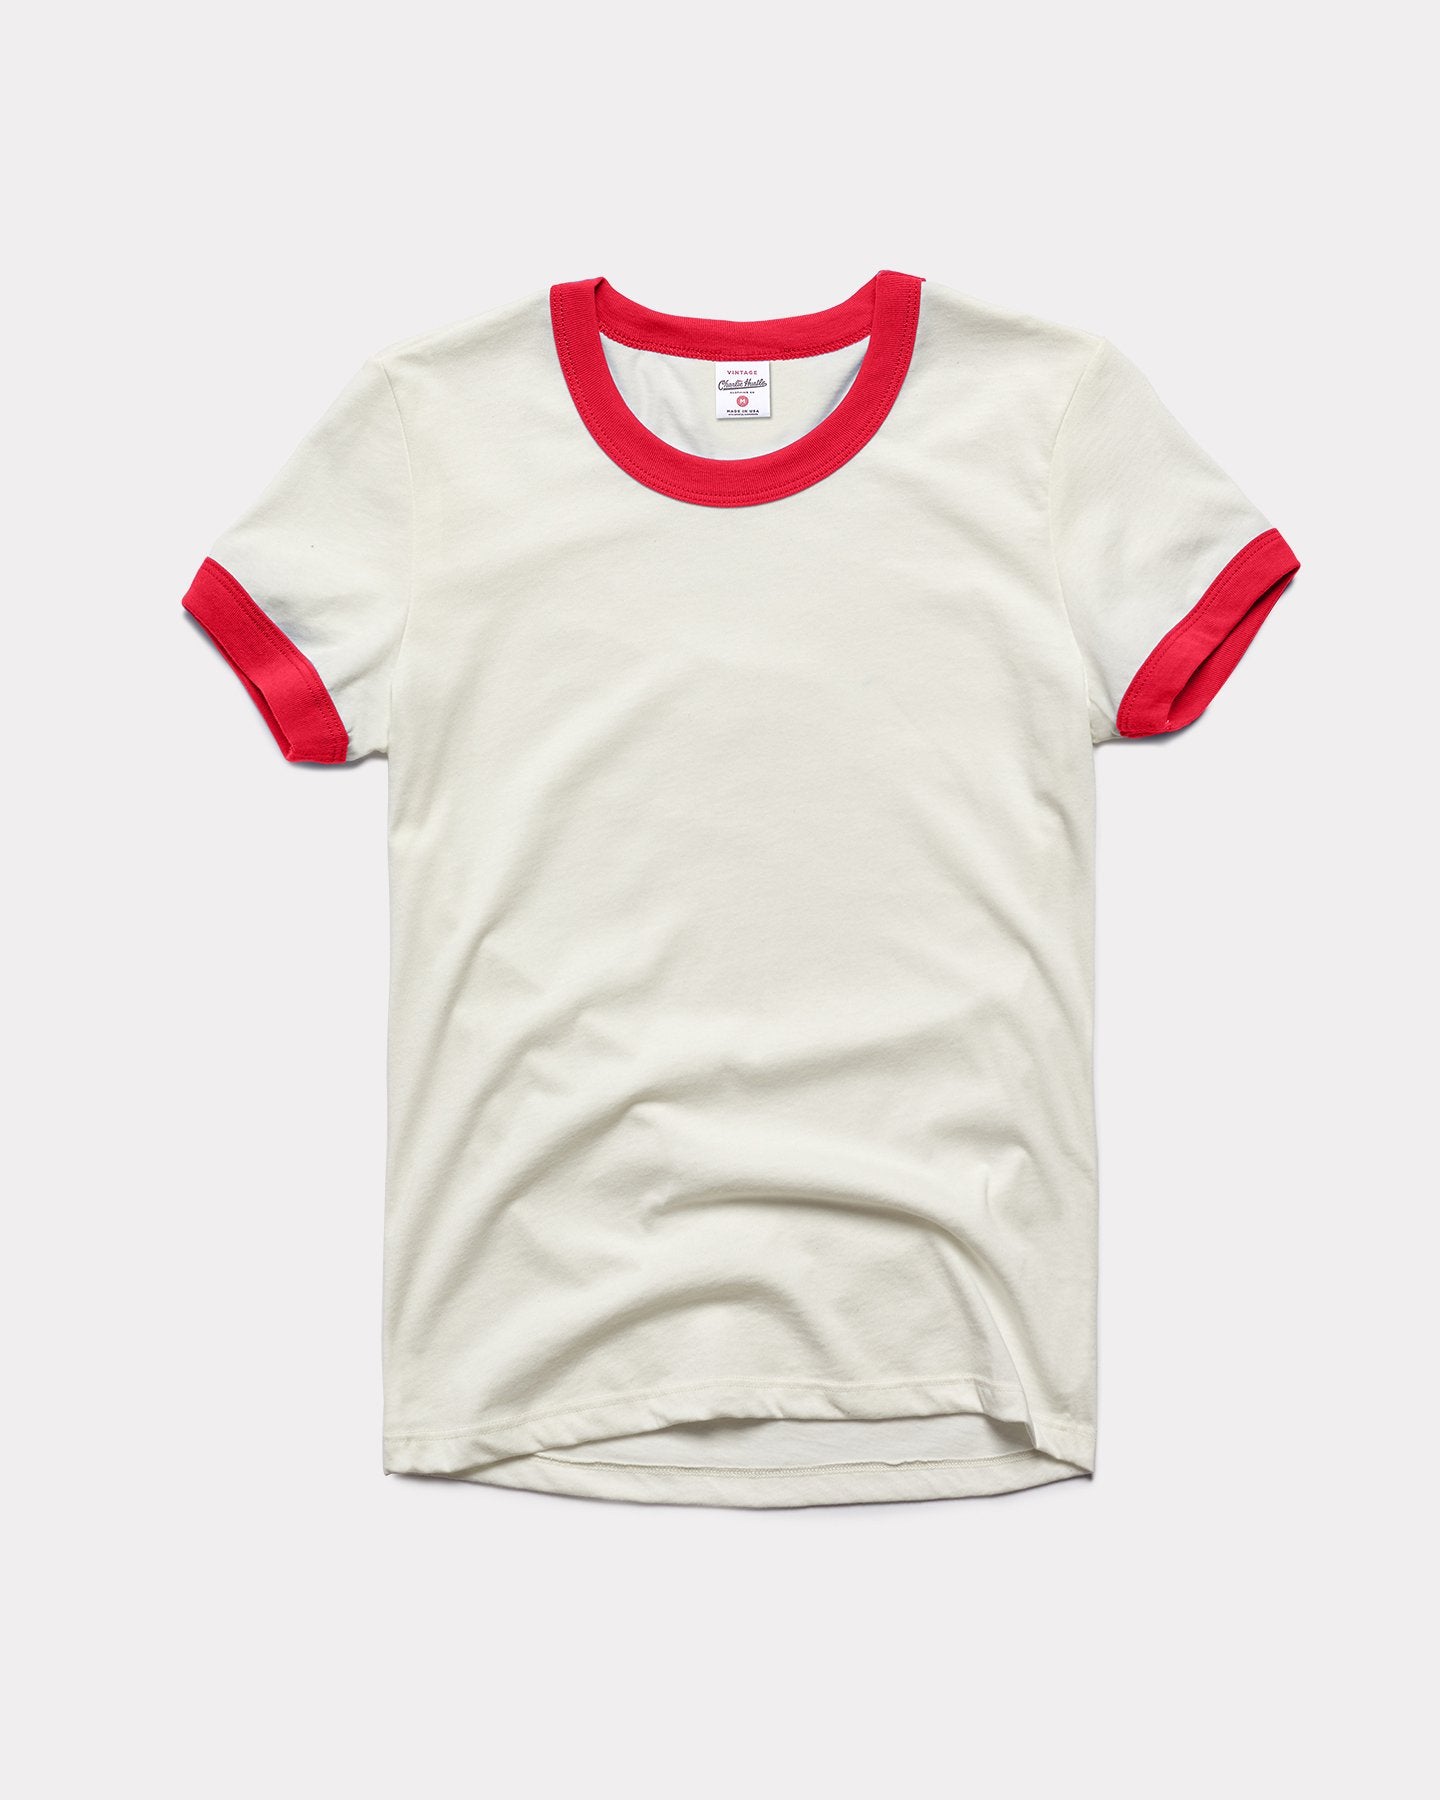 white and red tee